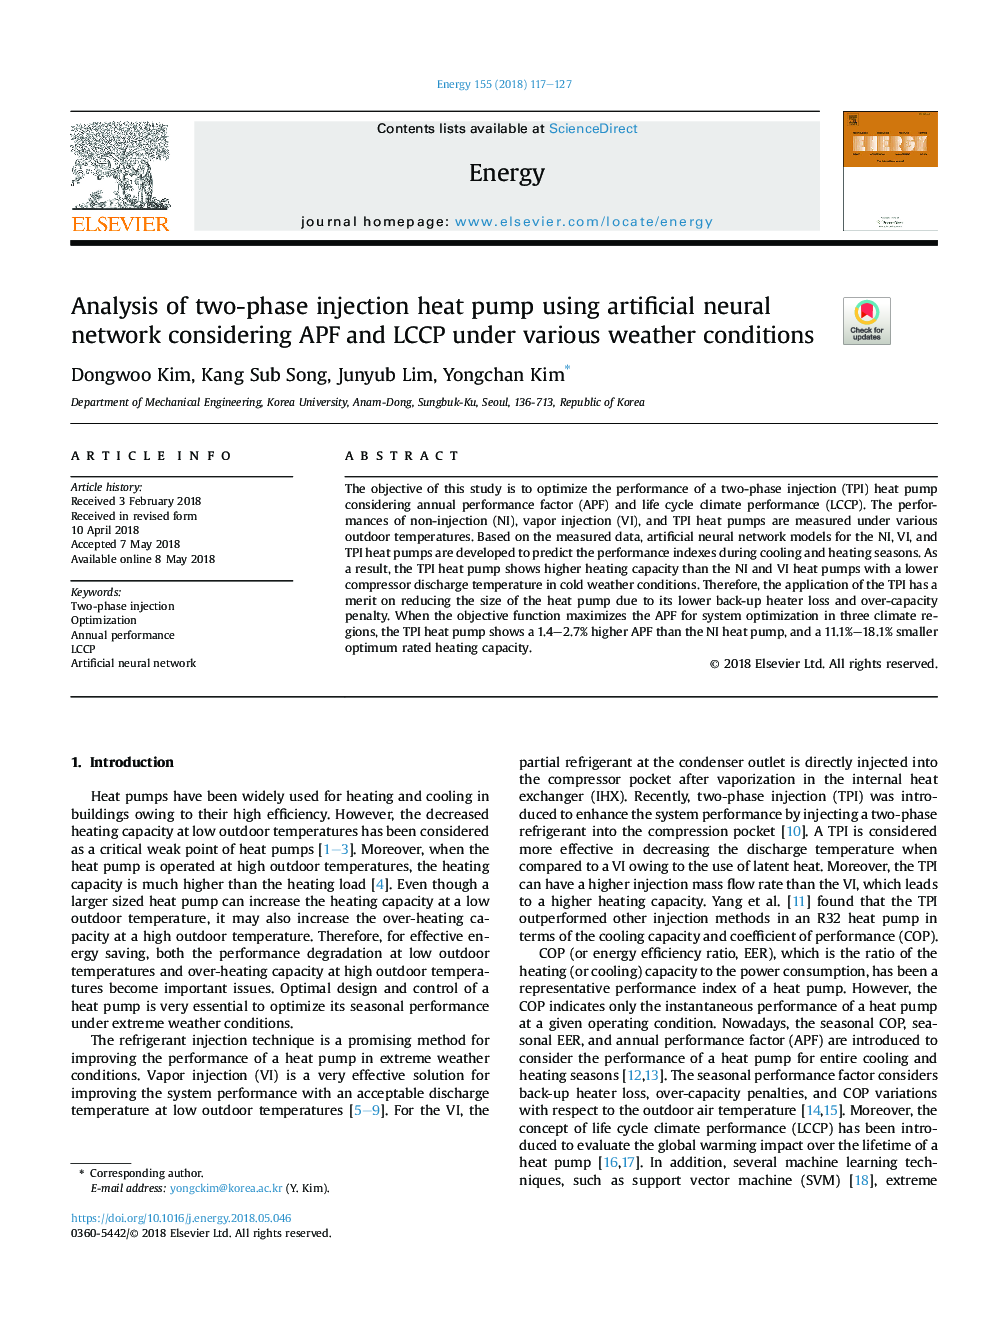 Analysis of two-phase injection heat pump using artificial neural network considering APF and LCCP under various weather conditions